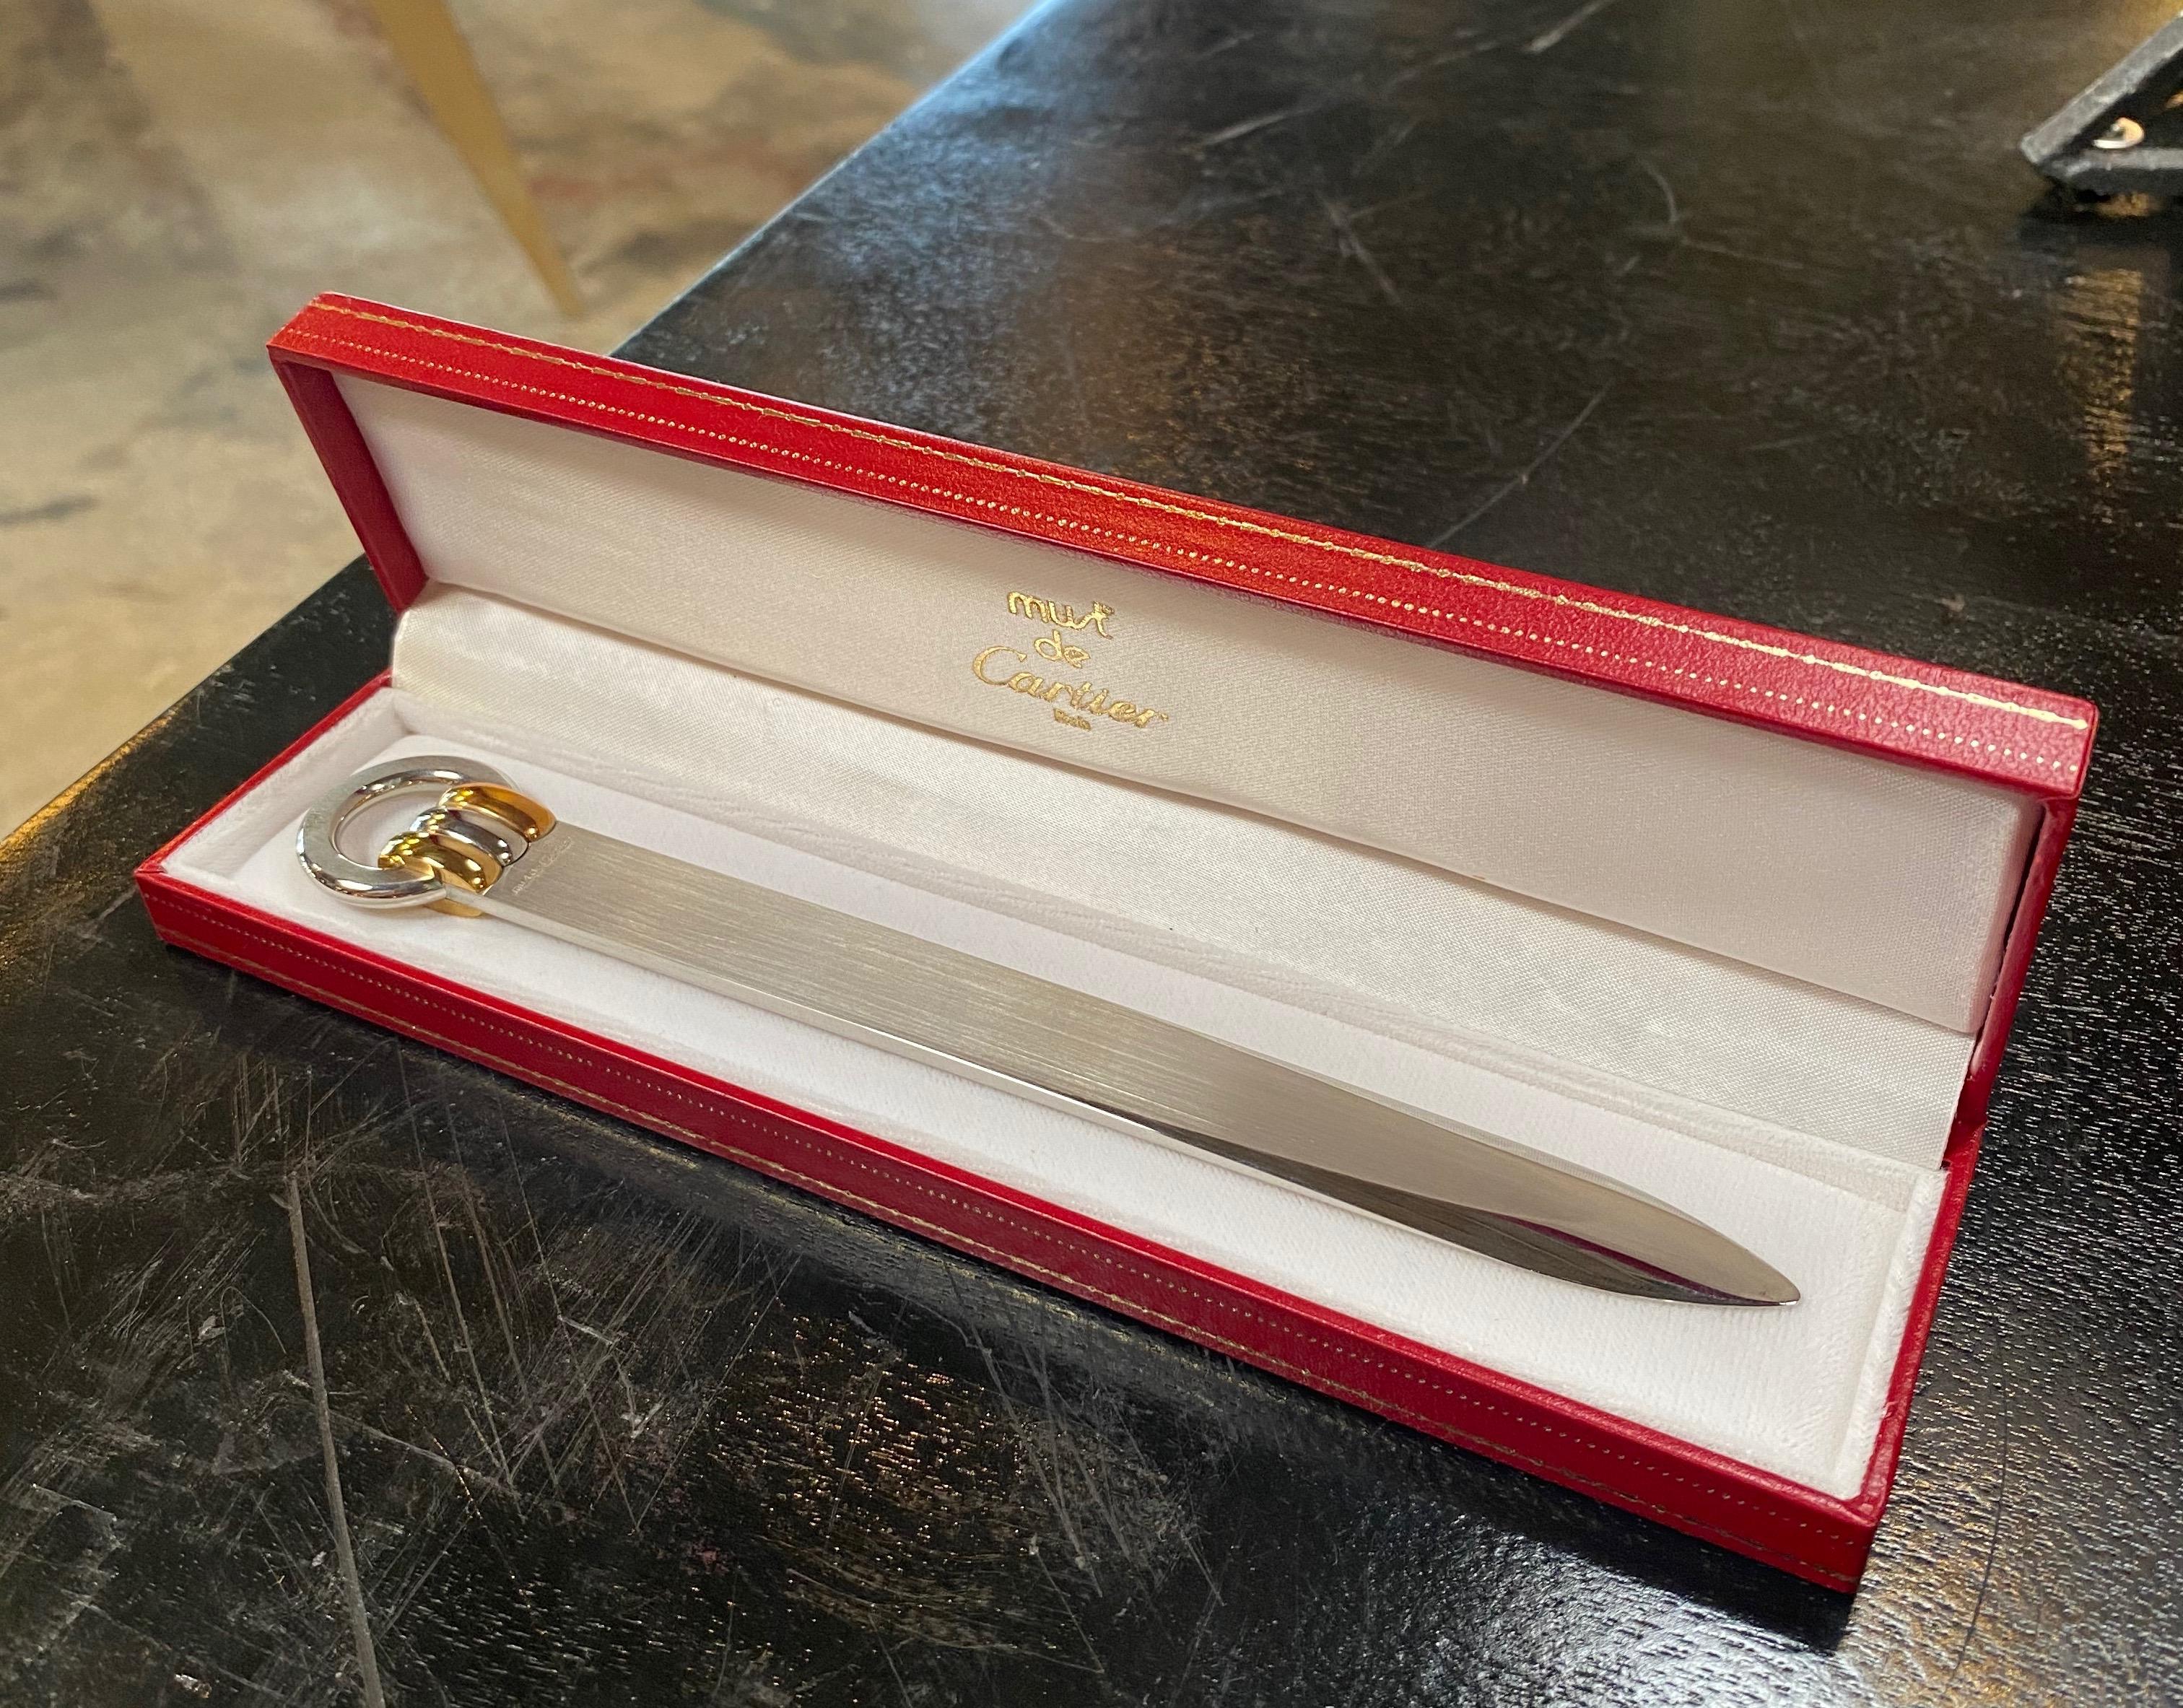 Cartier Must de Cartier letter opener three golds and palladium, excellent use and conservation condition, a piece that you cannot miss to put on your desk, a very nice and elegant piece. You buy the item shown in the photographs that are a faithful